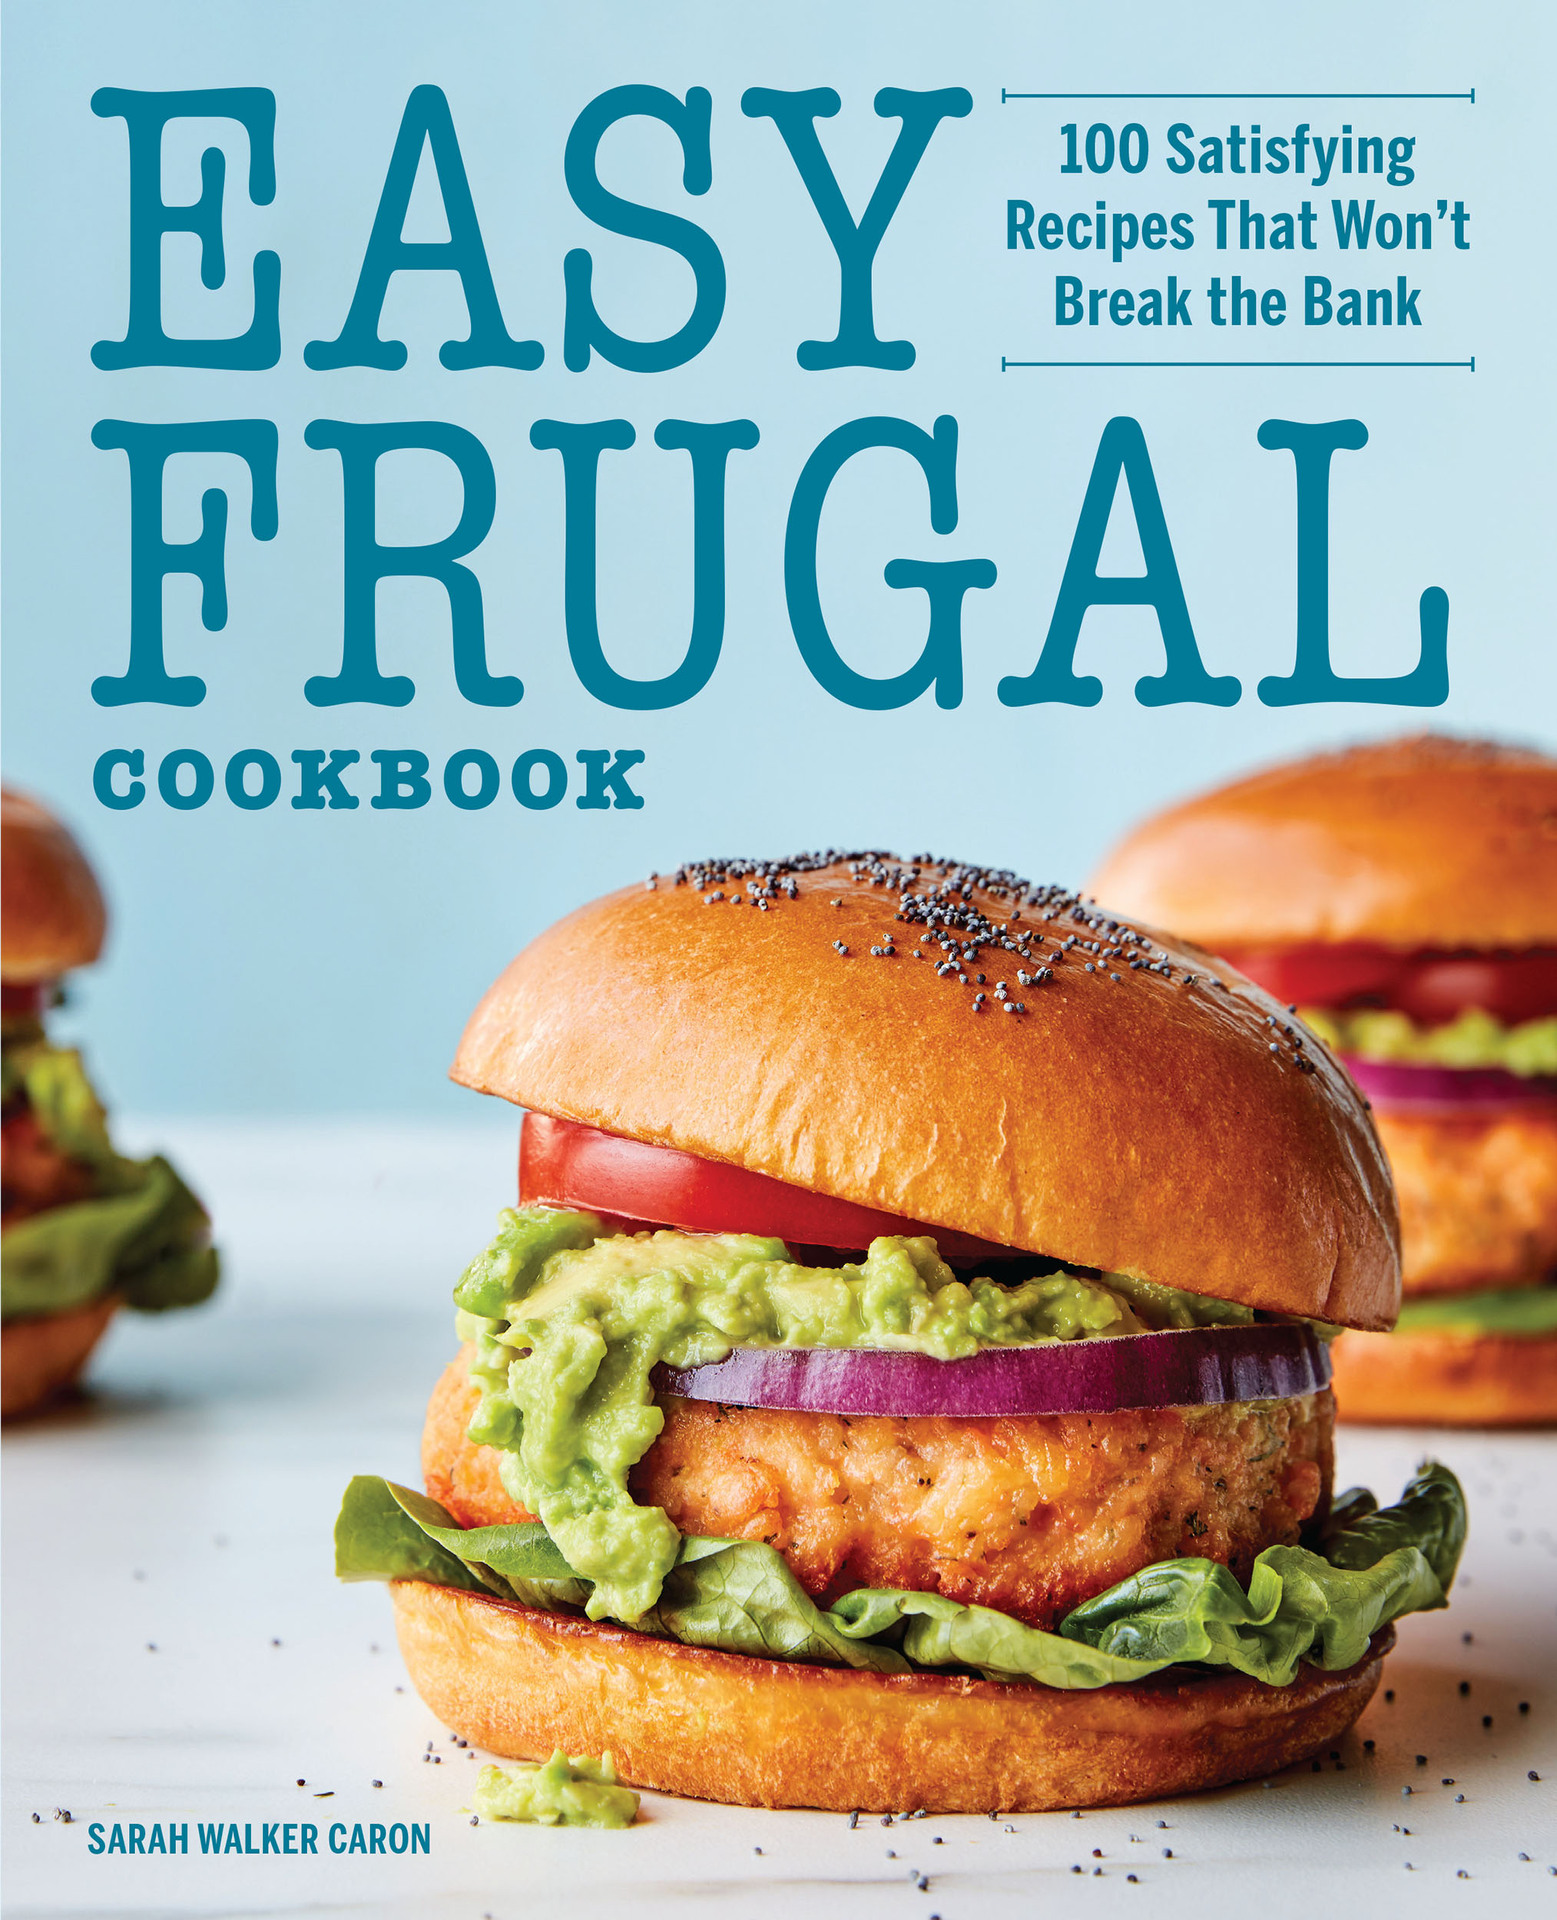 Easy Frugal Cookbook: 100 Satisfying Recipes That Won't ...